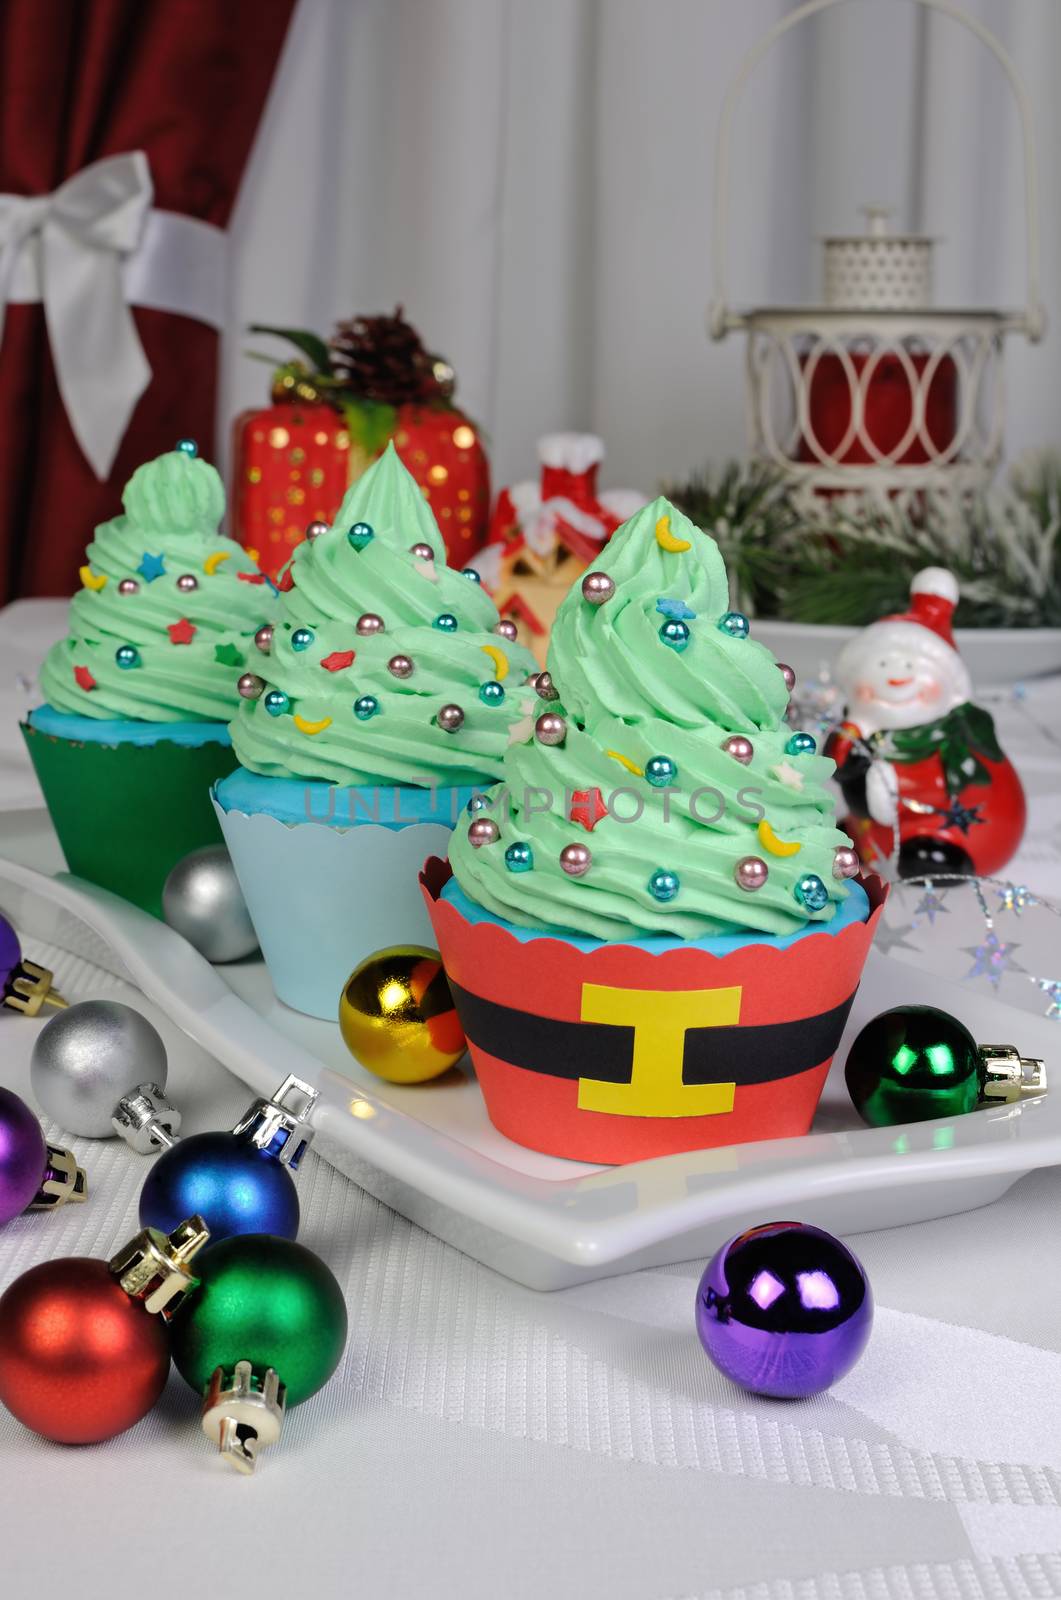 Christmas muffins in a tree with stars and balloons